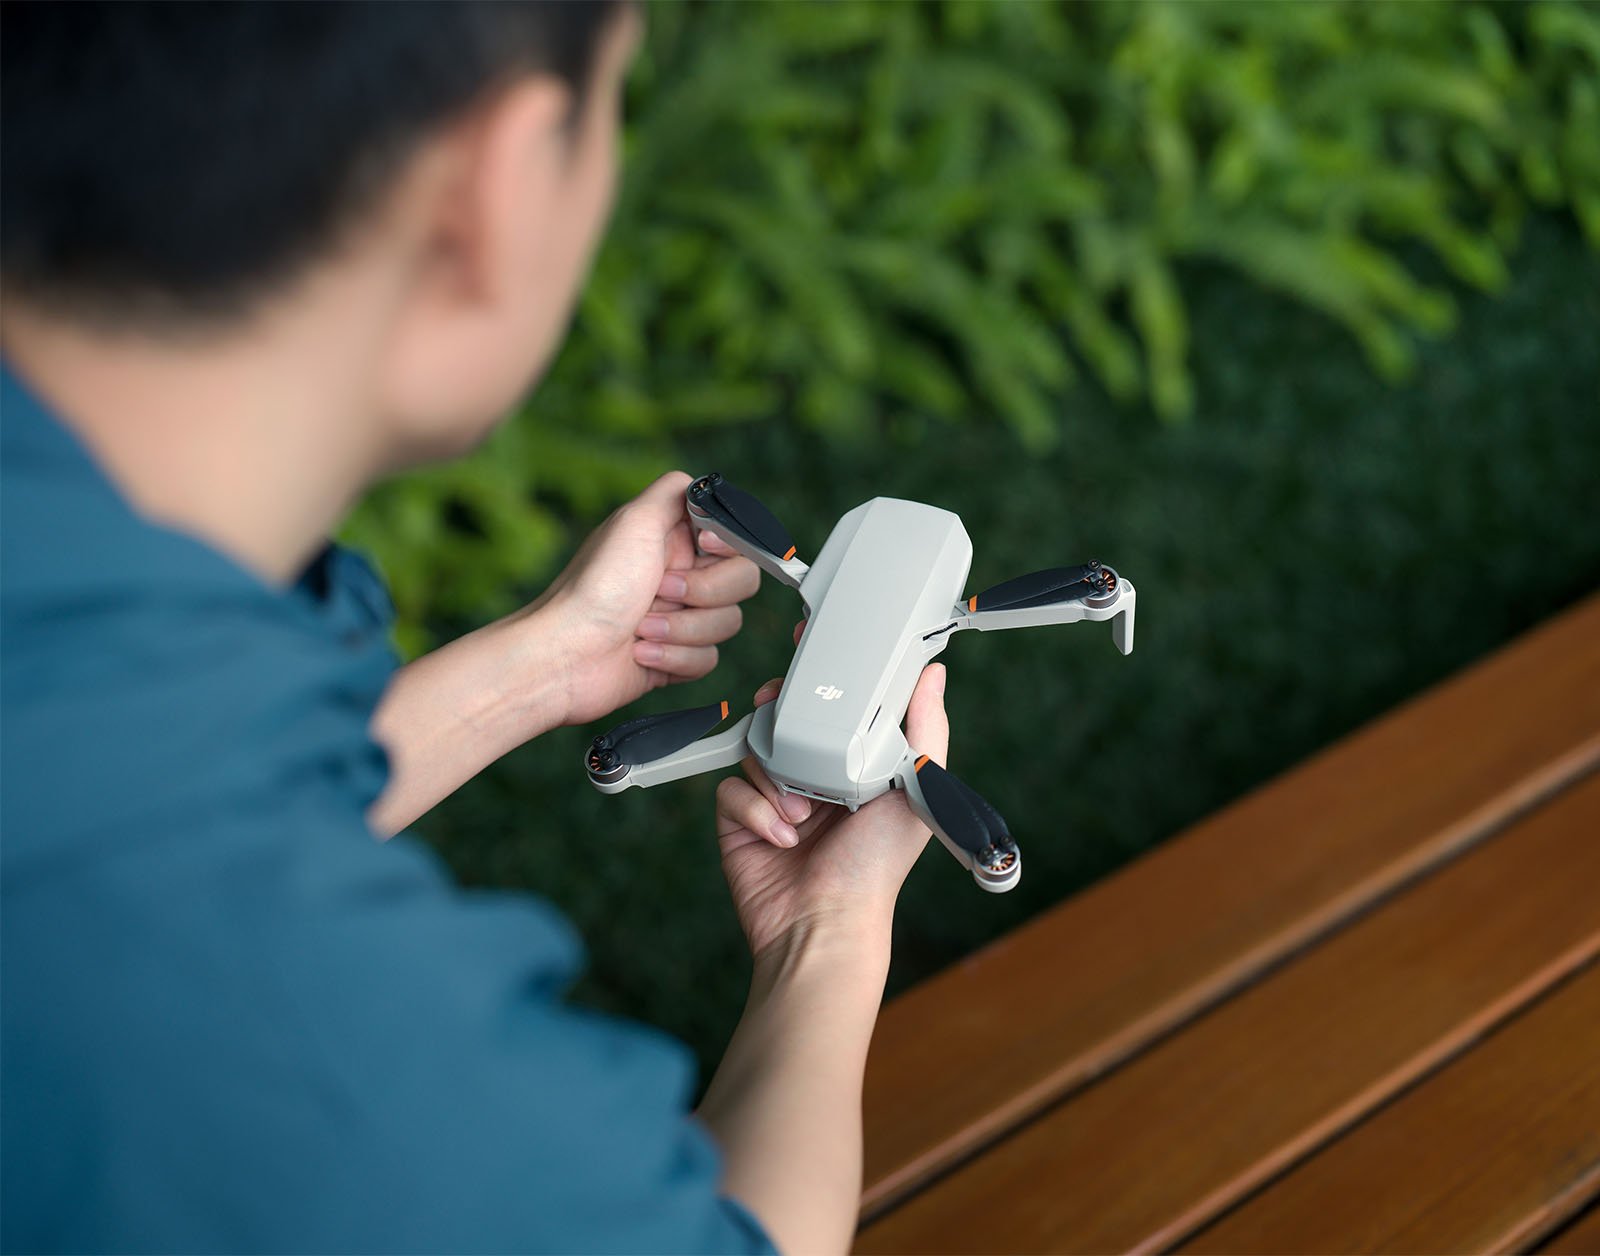 A person holding a small white drone with extended propellers, preparing for launch, sitting on a bench with a lush green hedge in the background.